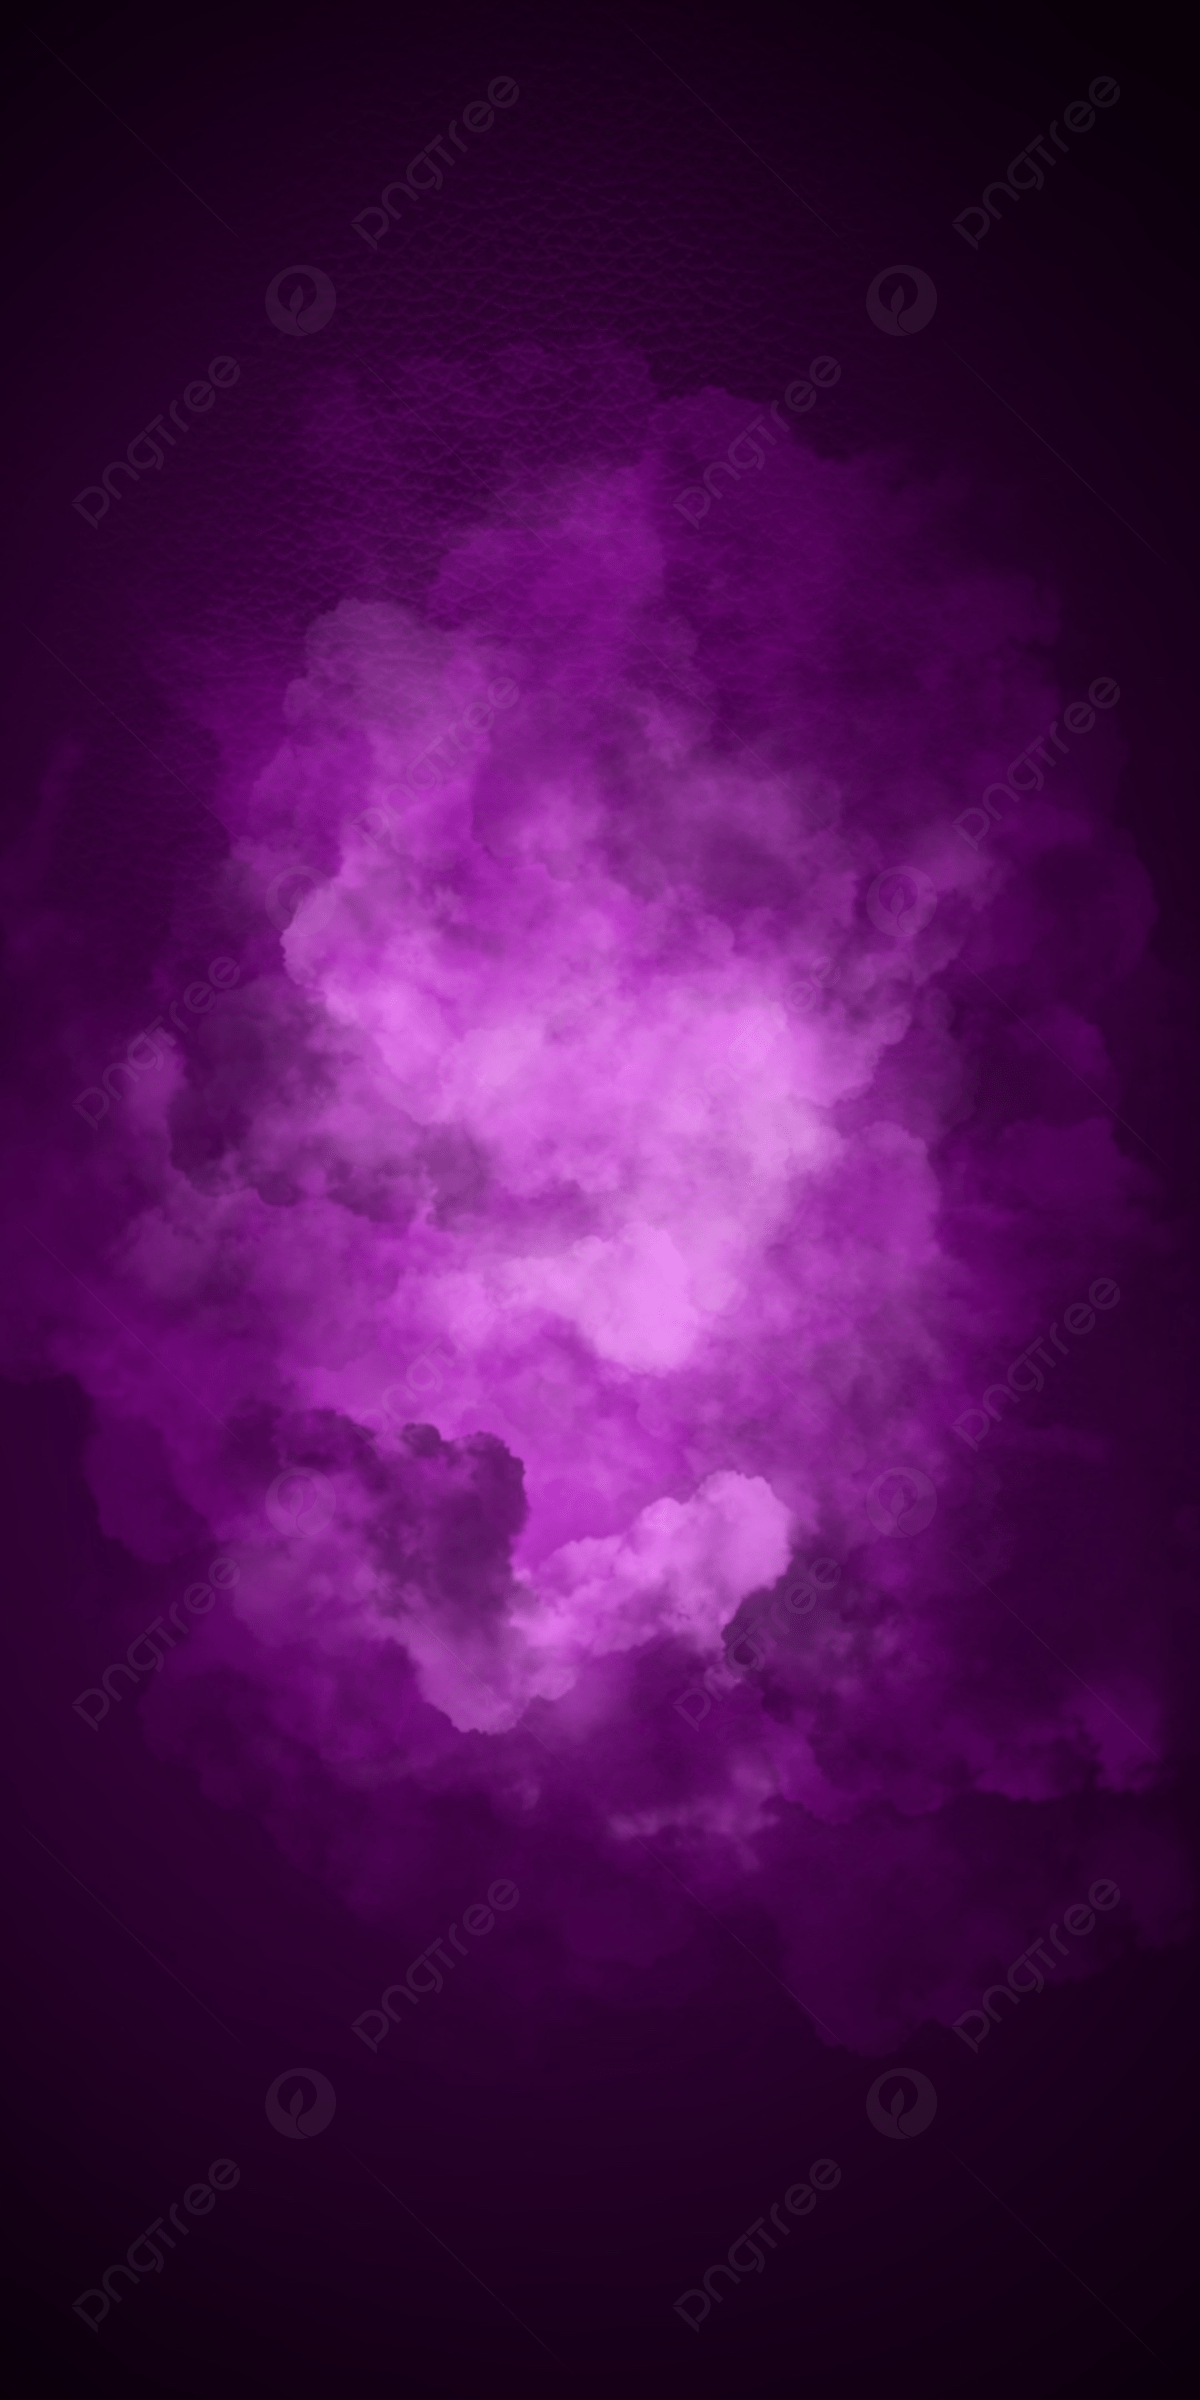 Modern Smoke Wallpaper Best Quality Background Wallpaper Image For Free Download